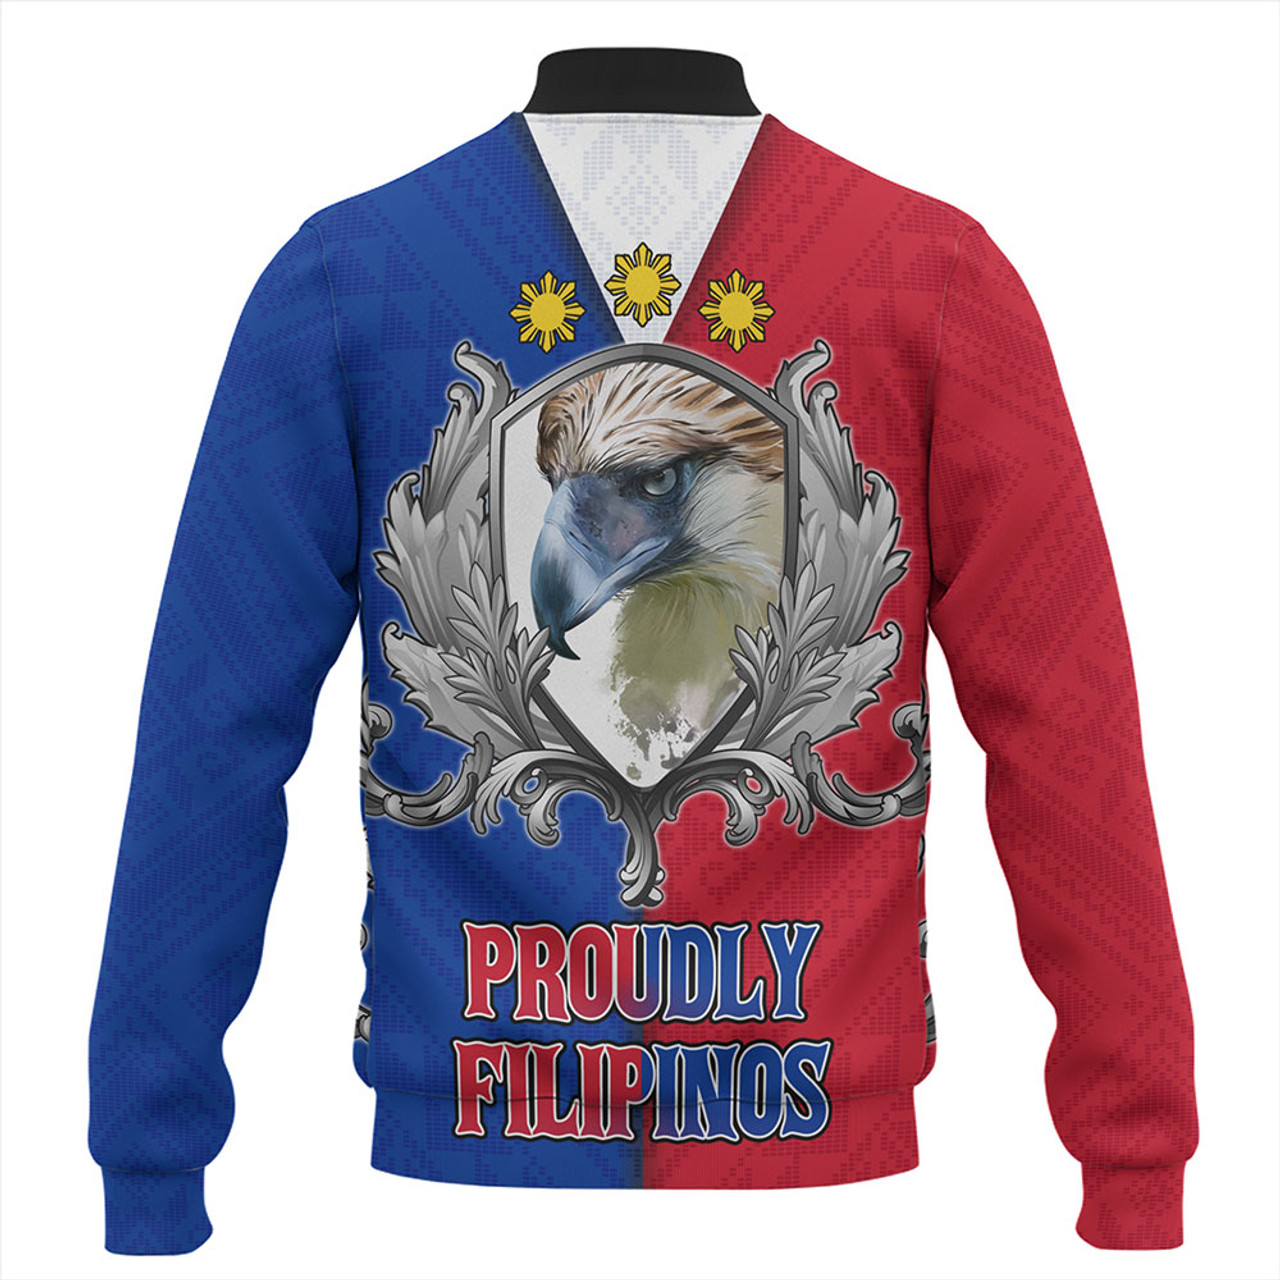 Philippines Filipinos Baseball Jacket The Philippine Eagle With Traditional Patterns